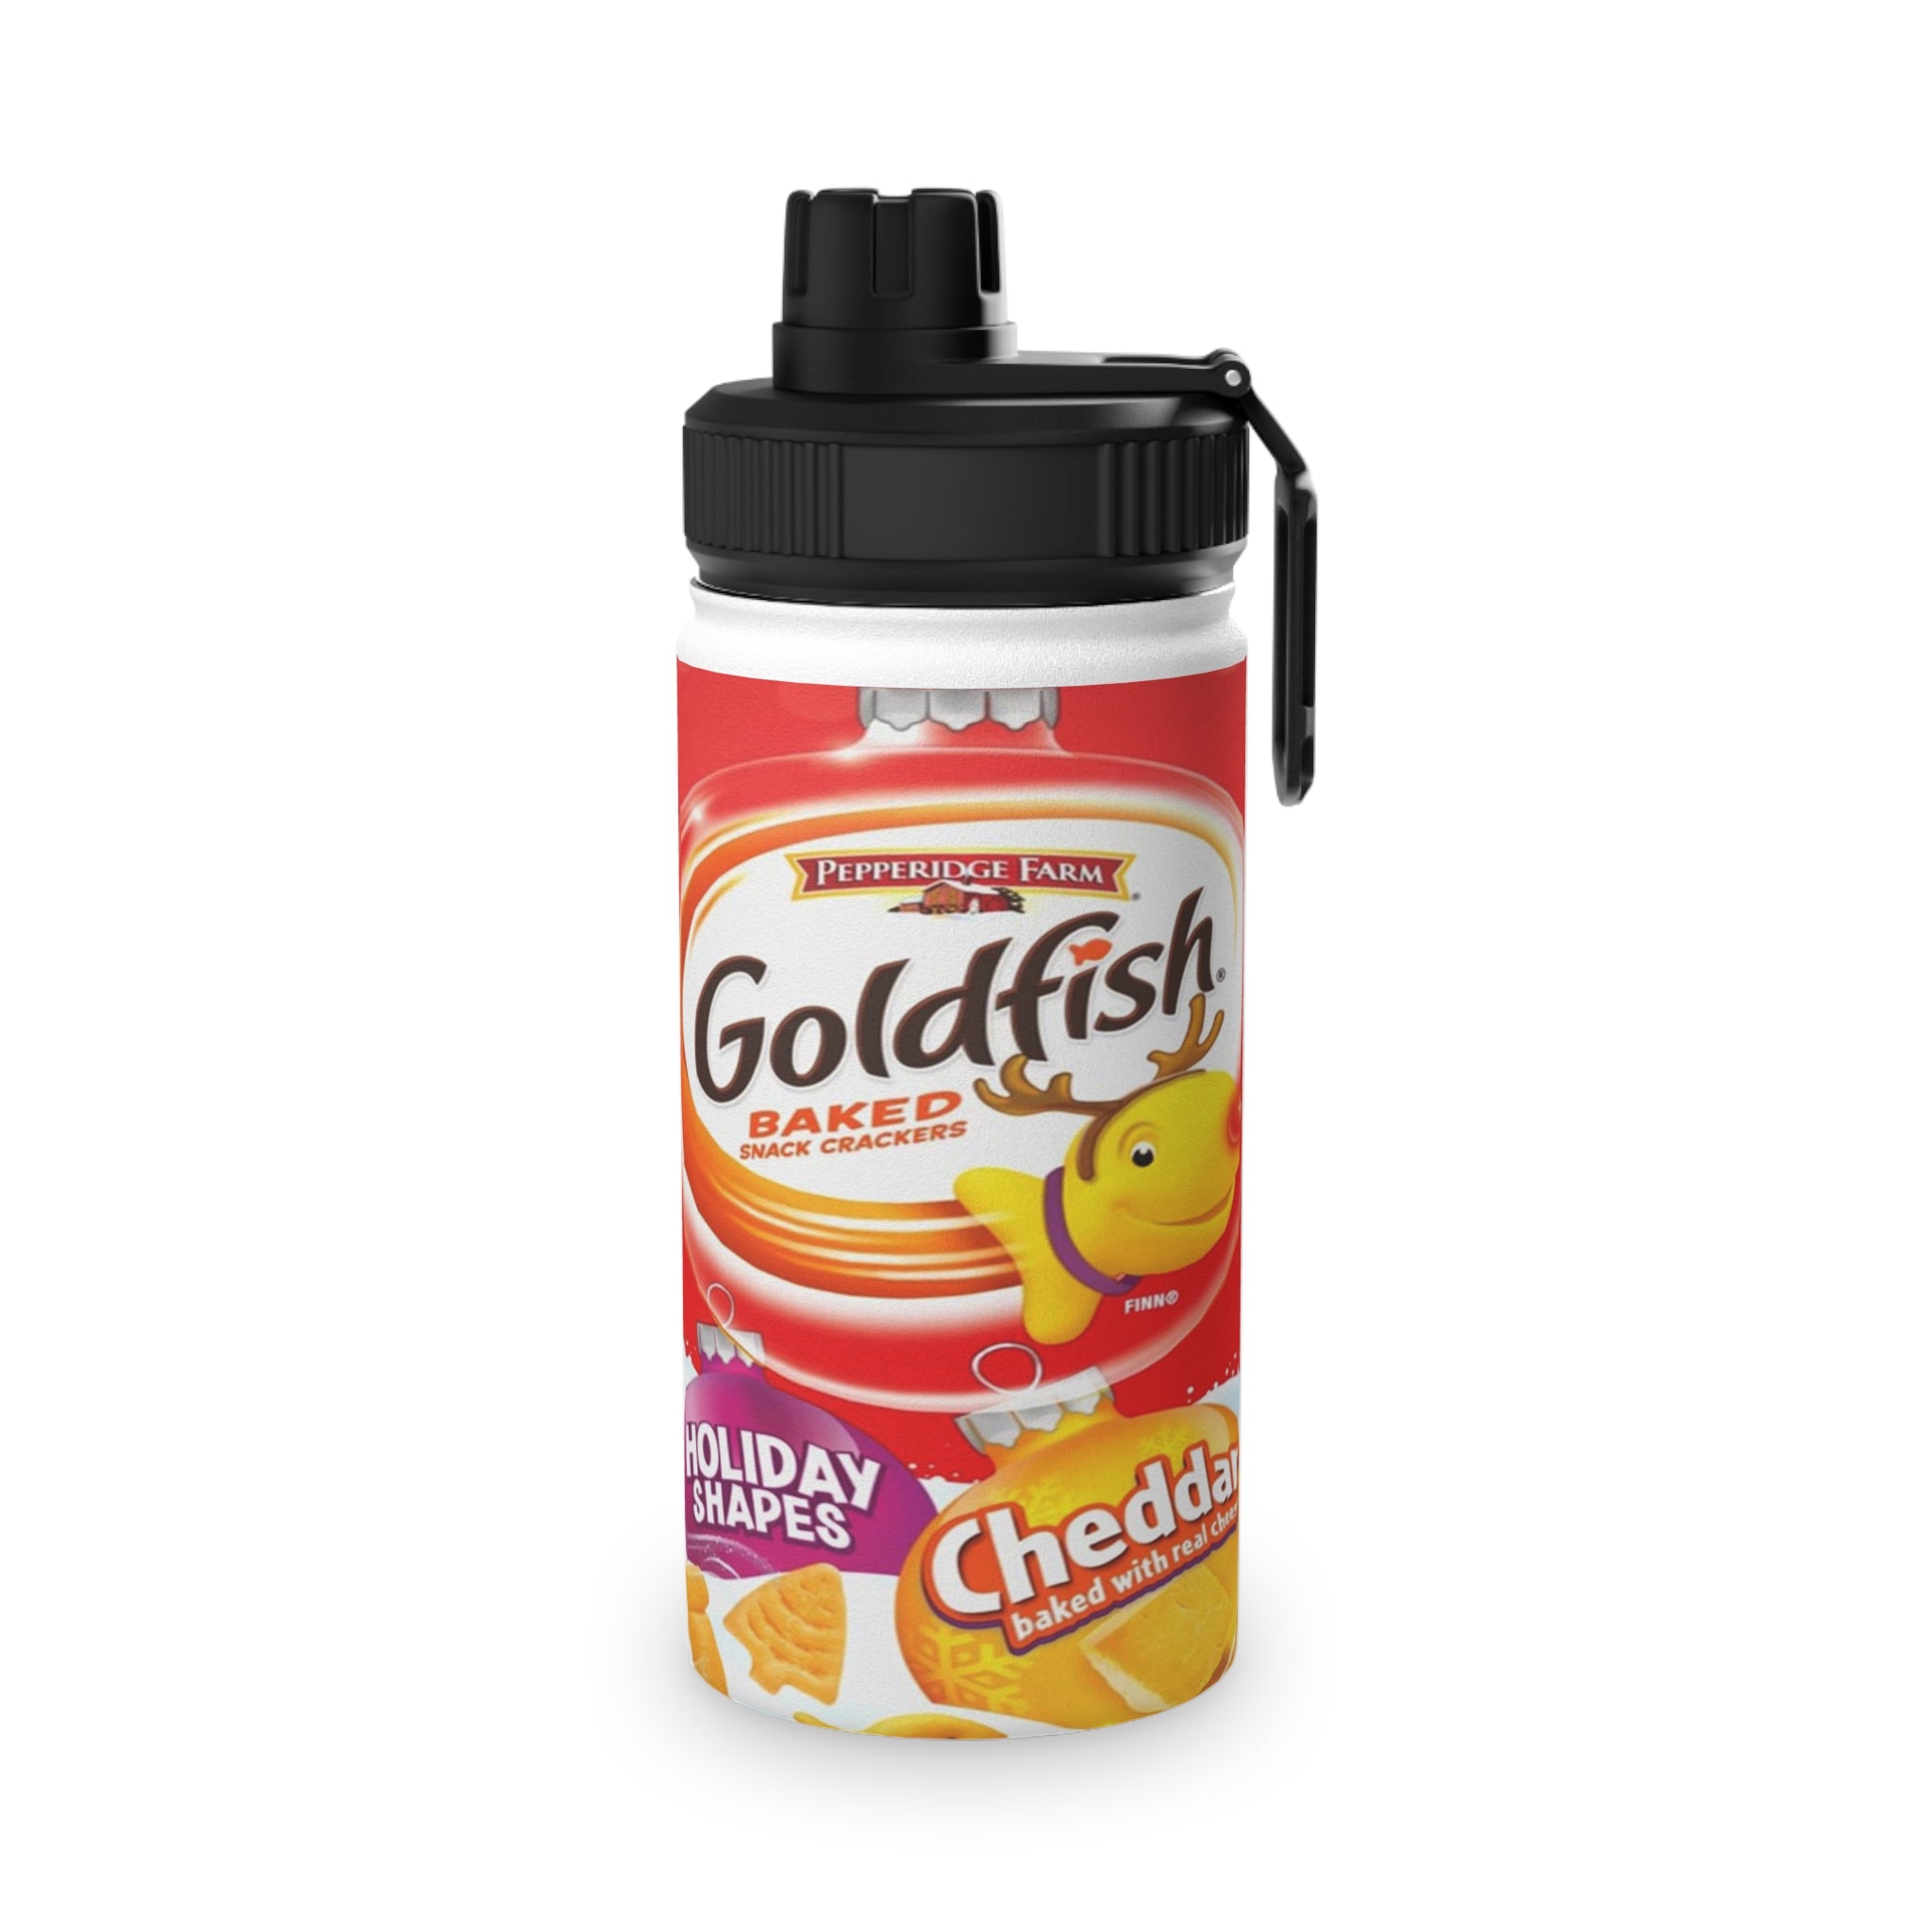 Pepperidge Farm Goldfish Holiday Shapes Cheddar Crackers Stainless Steel Water Bottle, Sports Lid